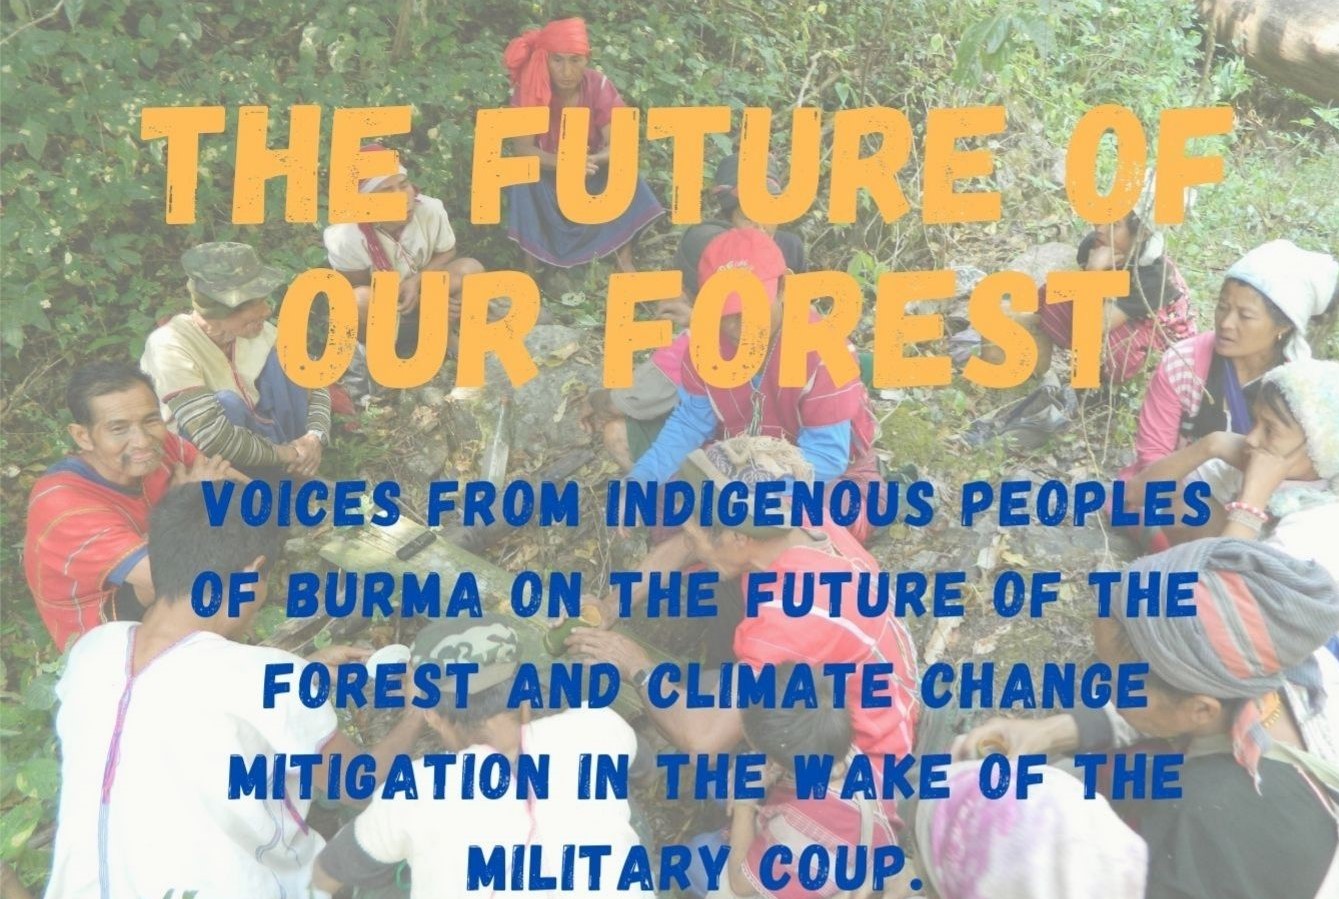 Event invitation: Indigenous Peoples speak out on military coup in Burma